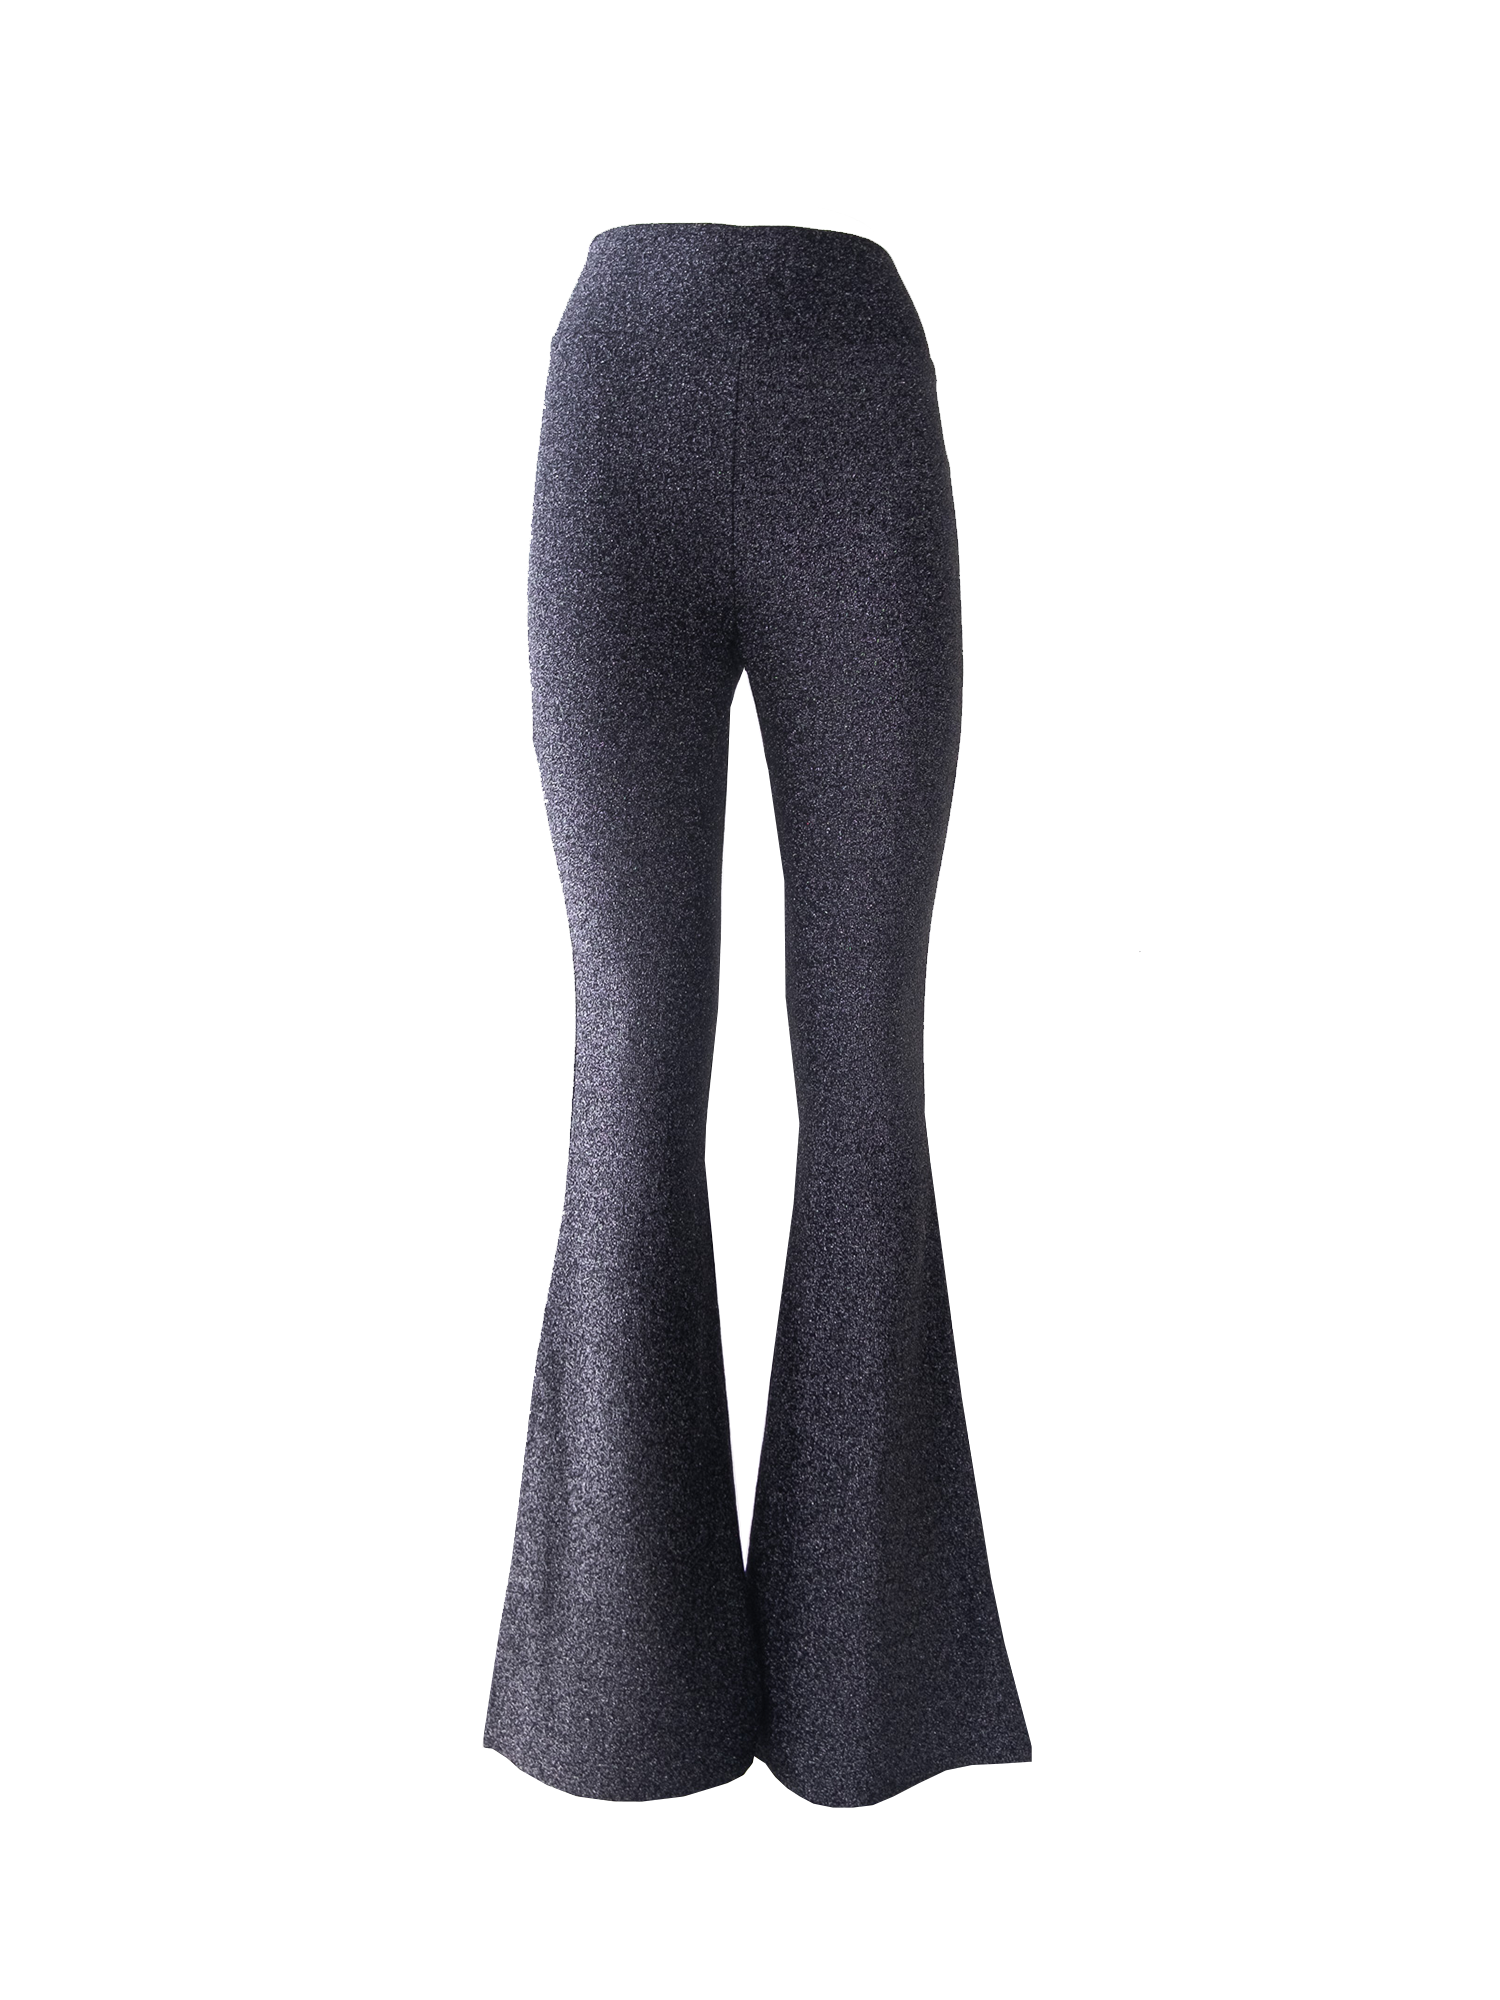 LOLA - flared trouser with high waist in charcoal grey lurex